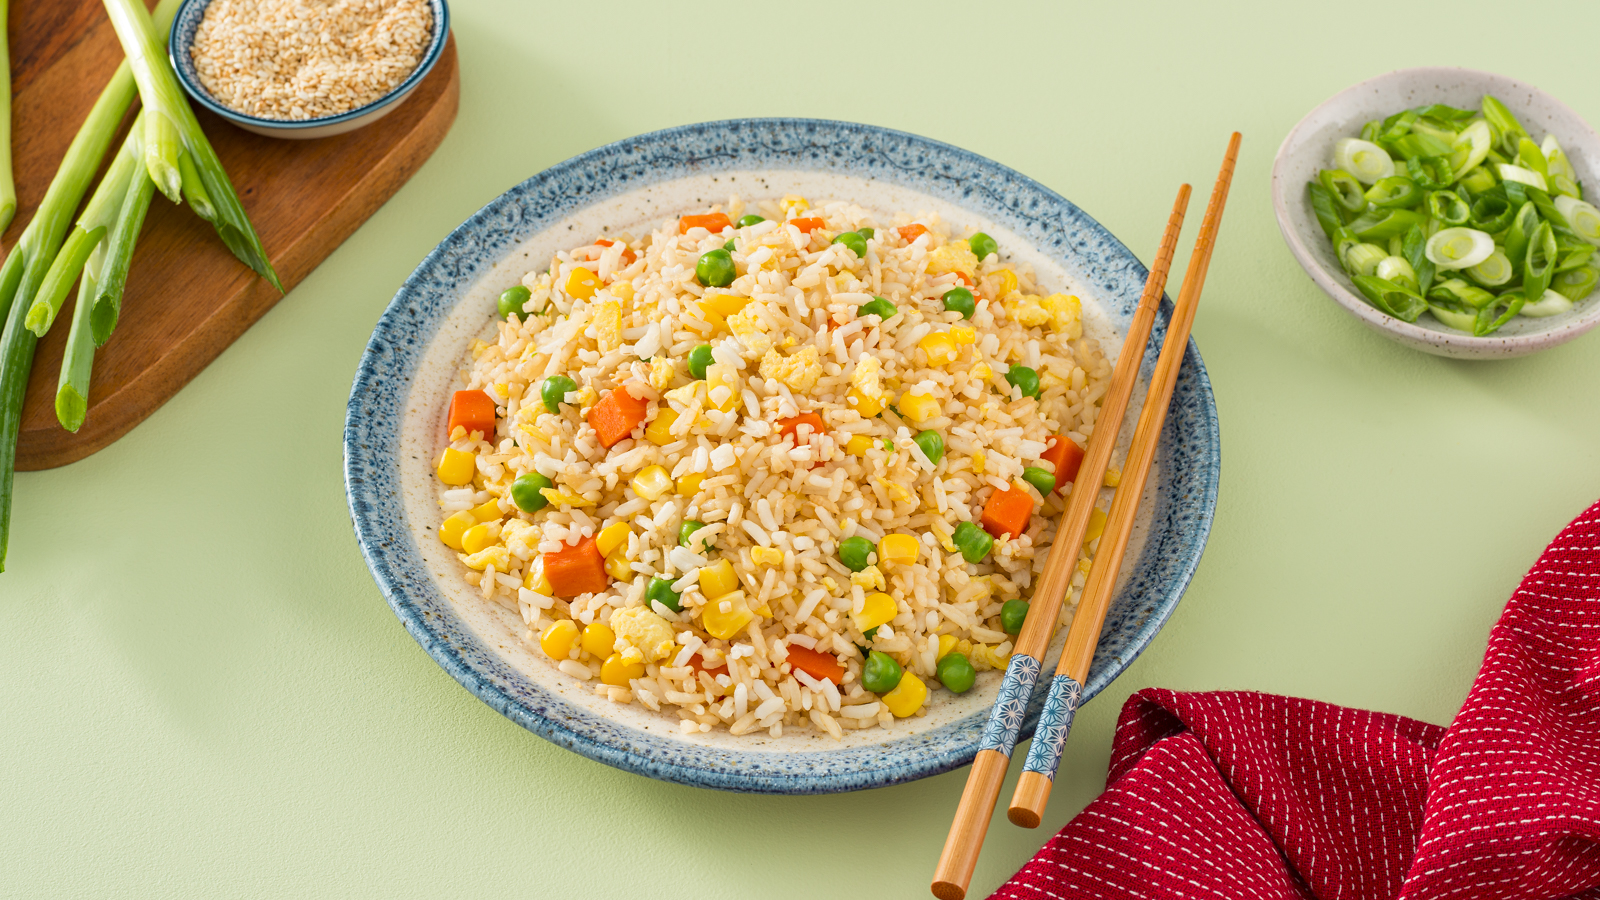 Fried Rice Recipe Day Old Rice - Insblog